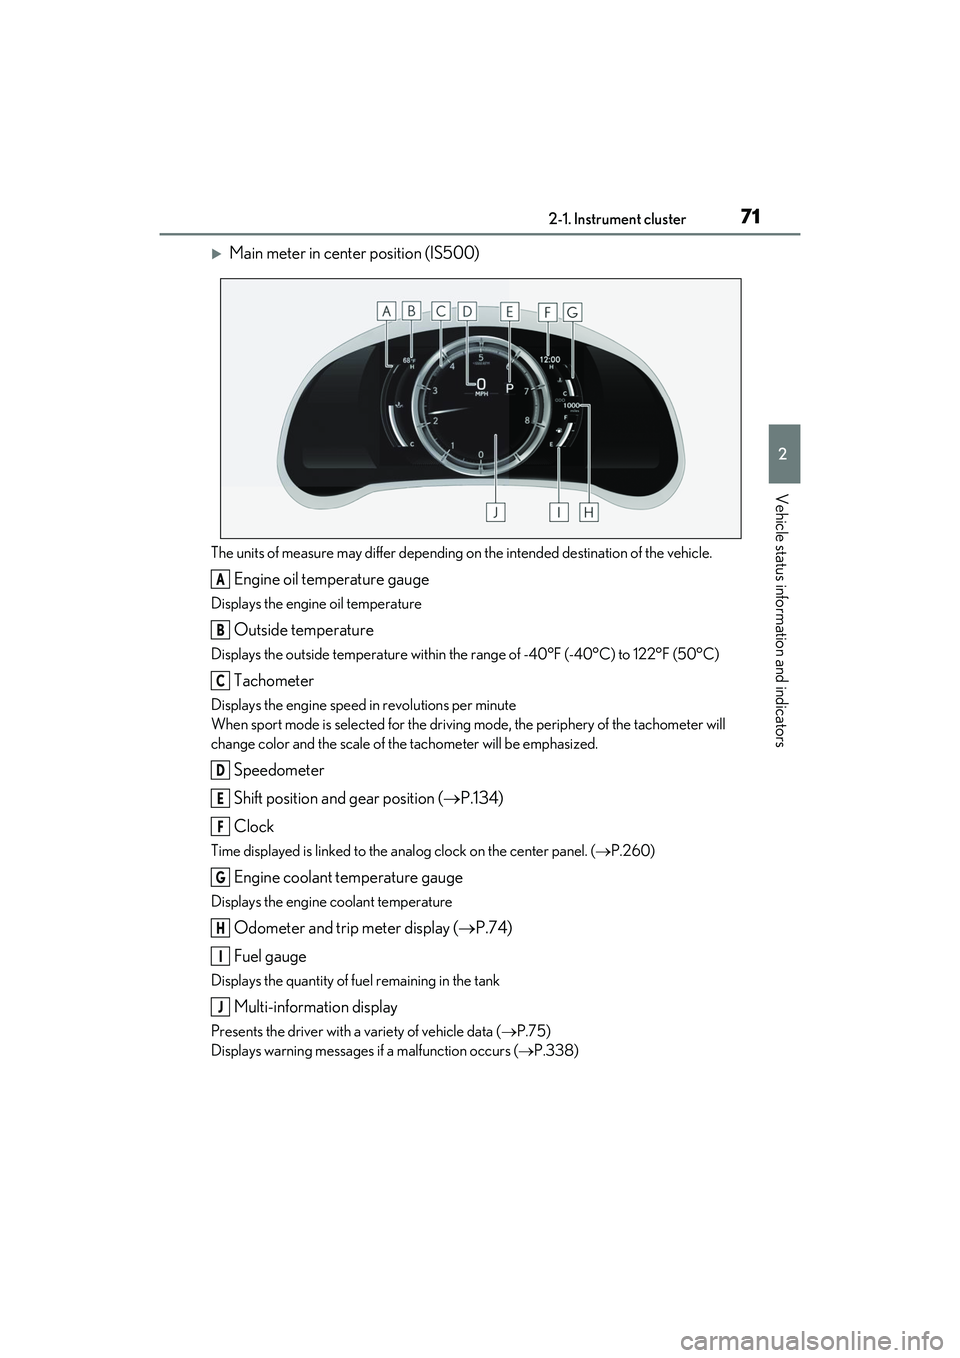 LEXUS IS300 2022  Owners Manual 712-1. Instrument cluster
2
Vehicle status information and indicators
Main meter in center position (IS500)
The units of measure may differ depending on the intended destination of the vehicle.
Eng